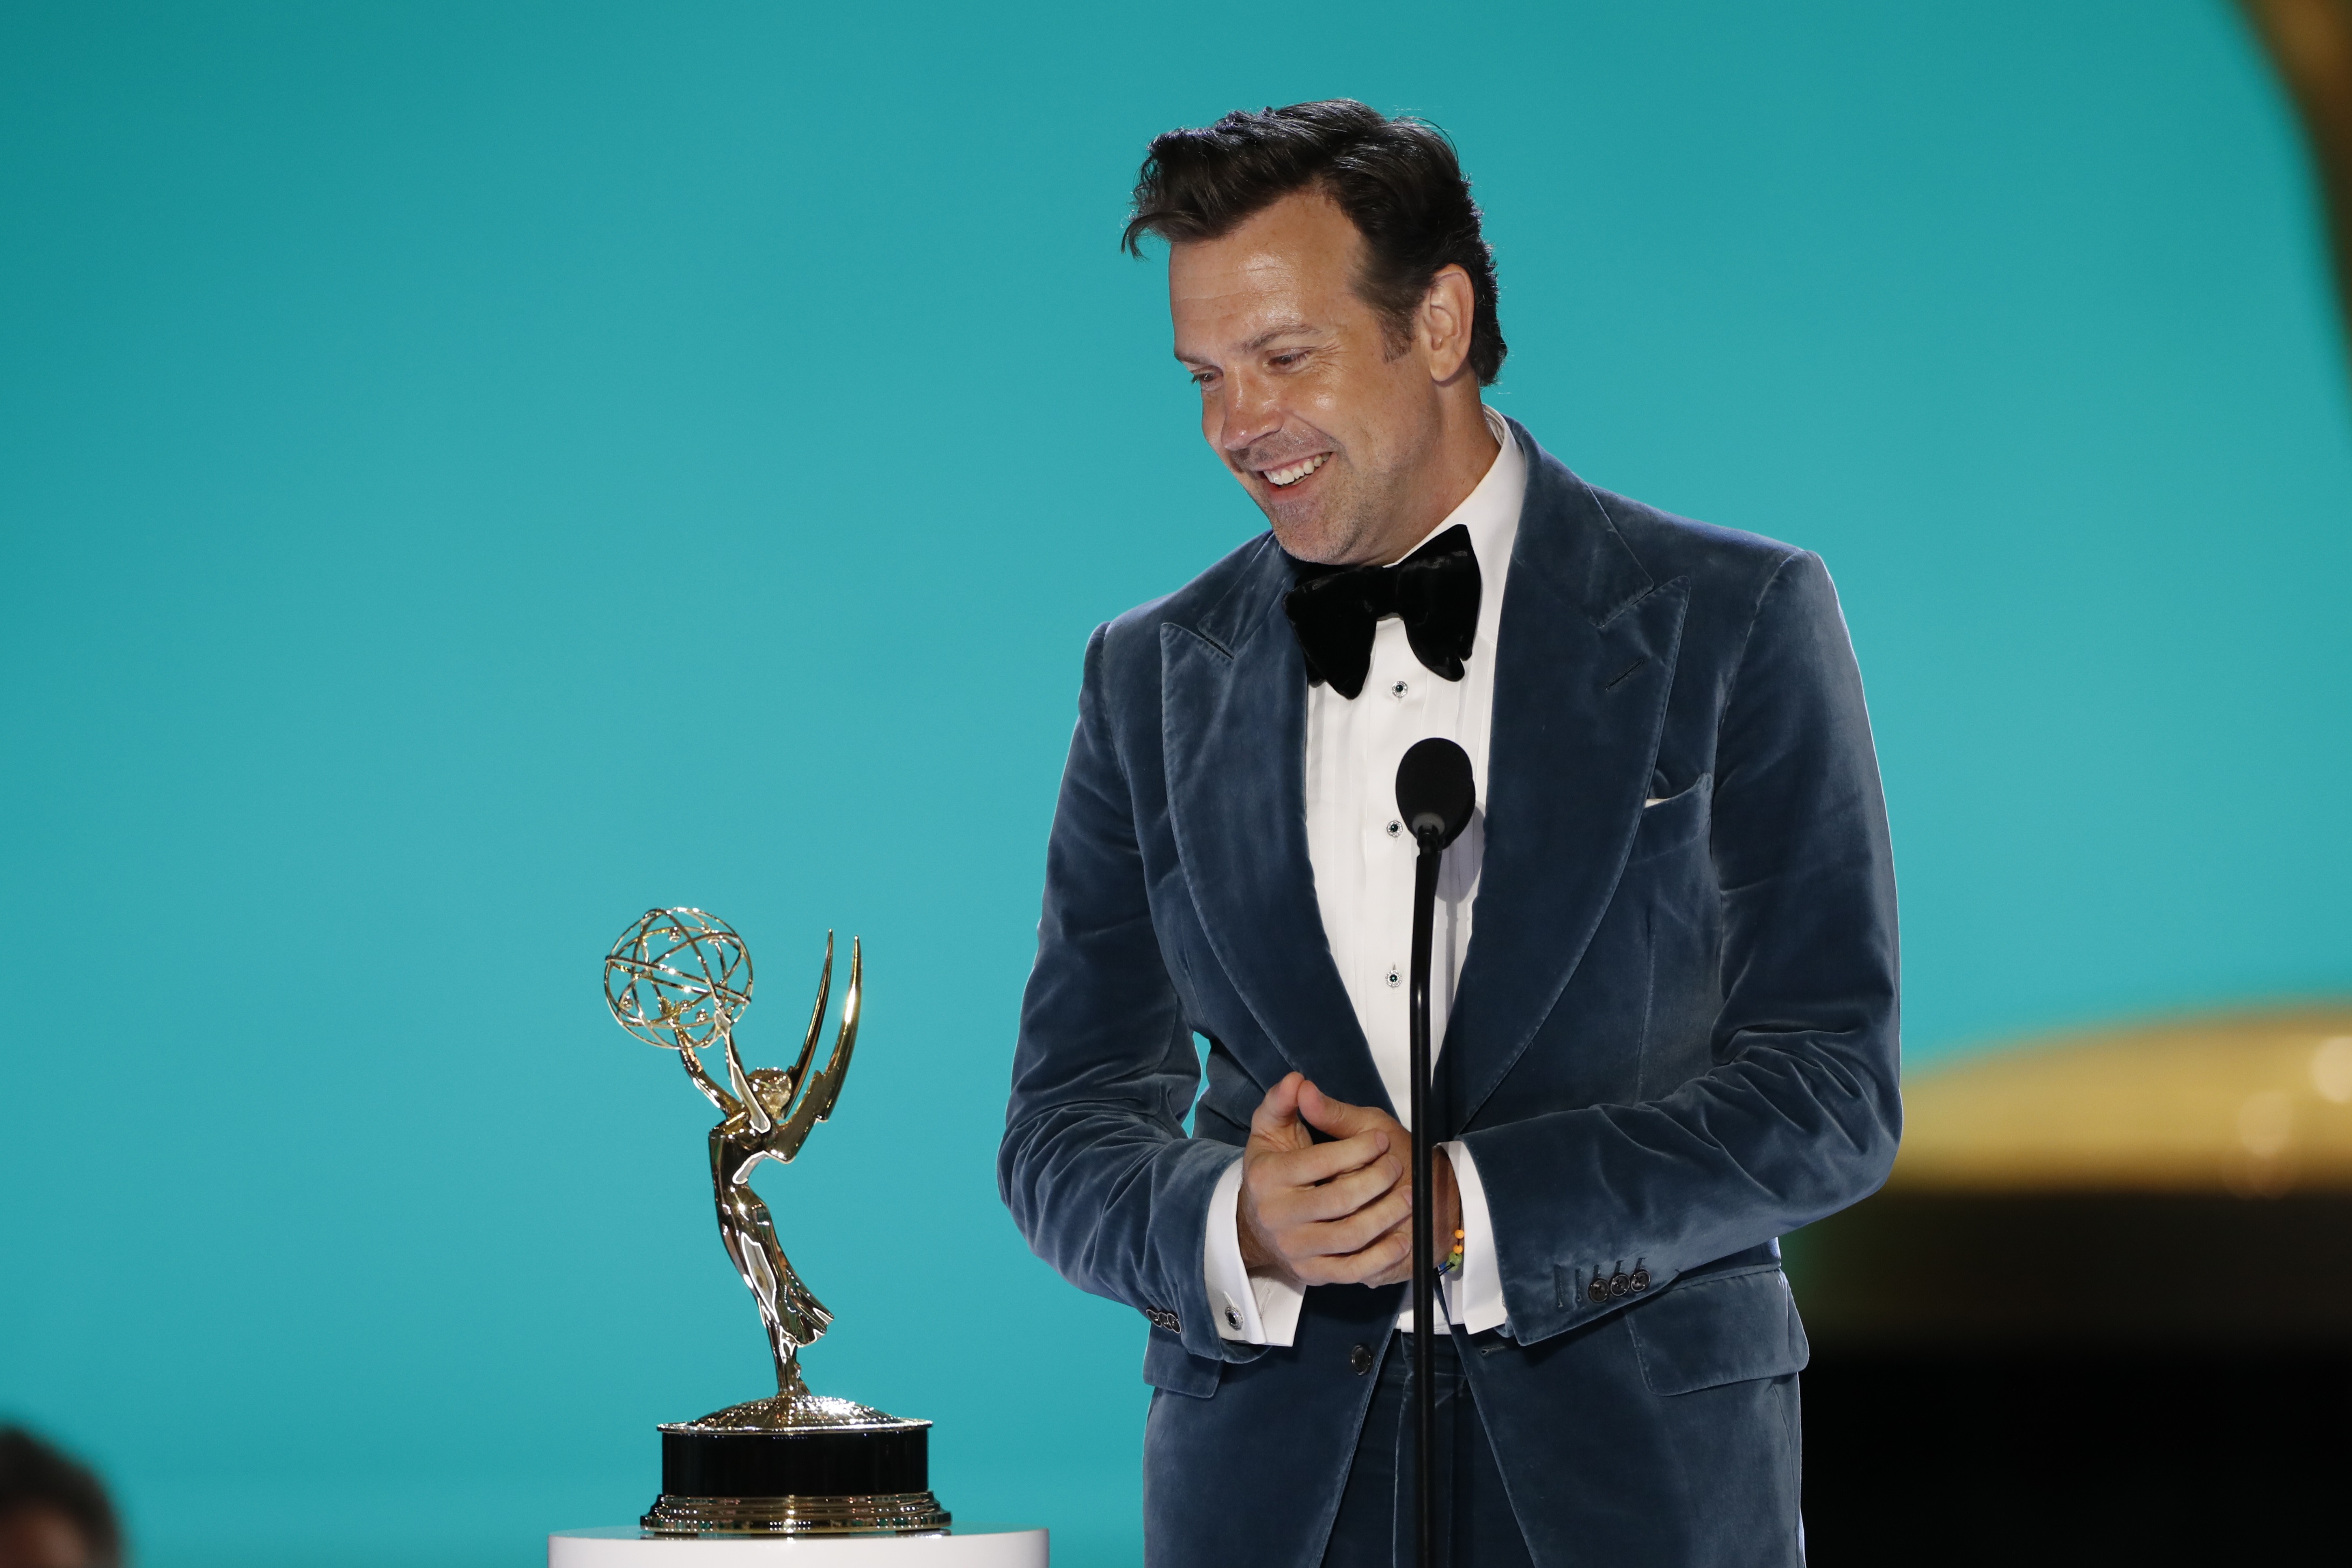 Jason Sudeikis giving his acceptance speech at the 73rd Primetime Emmy Awards for Ted Lasso